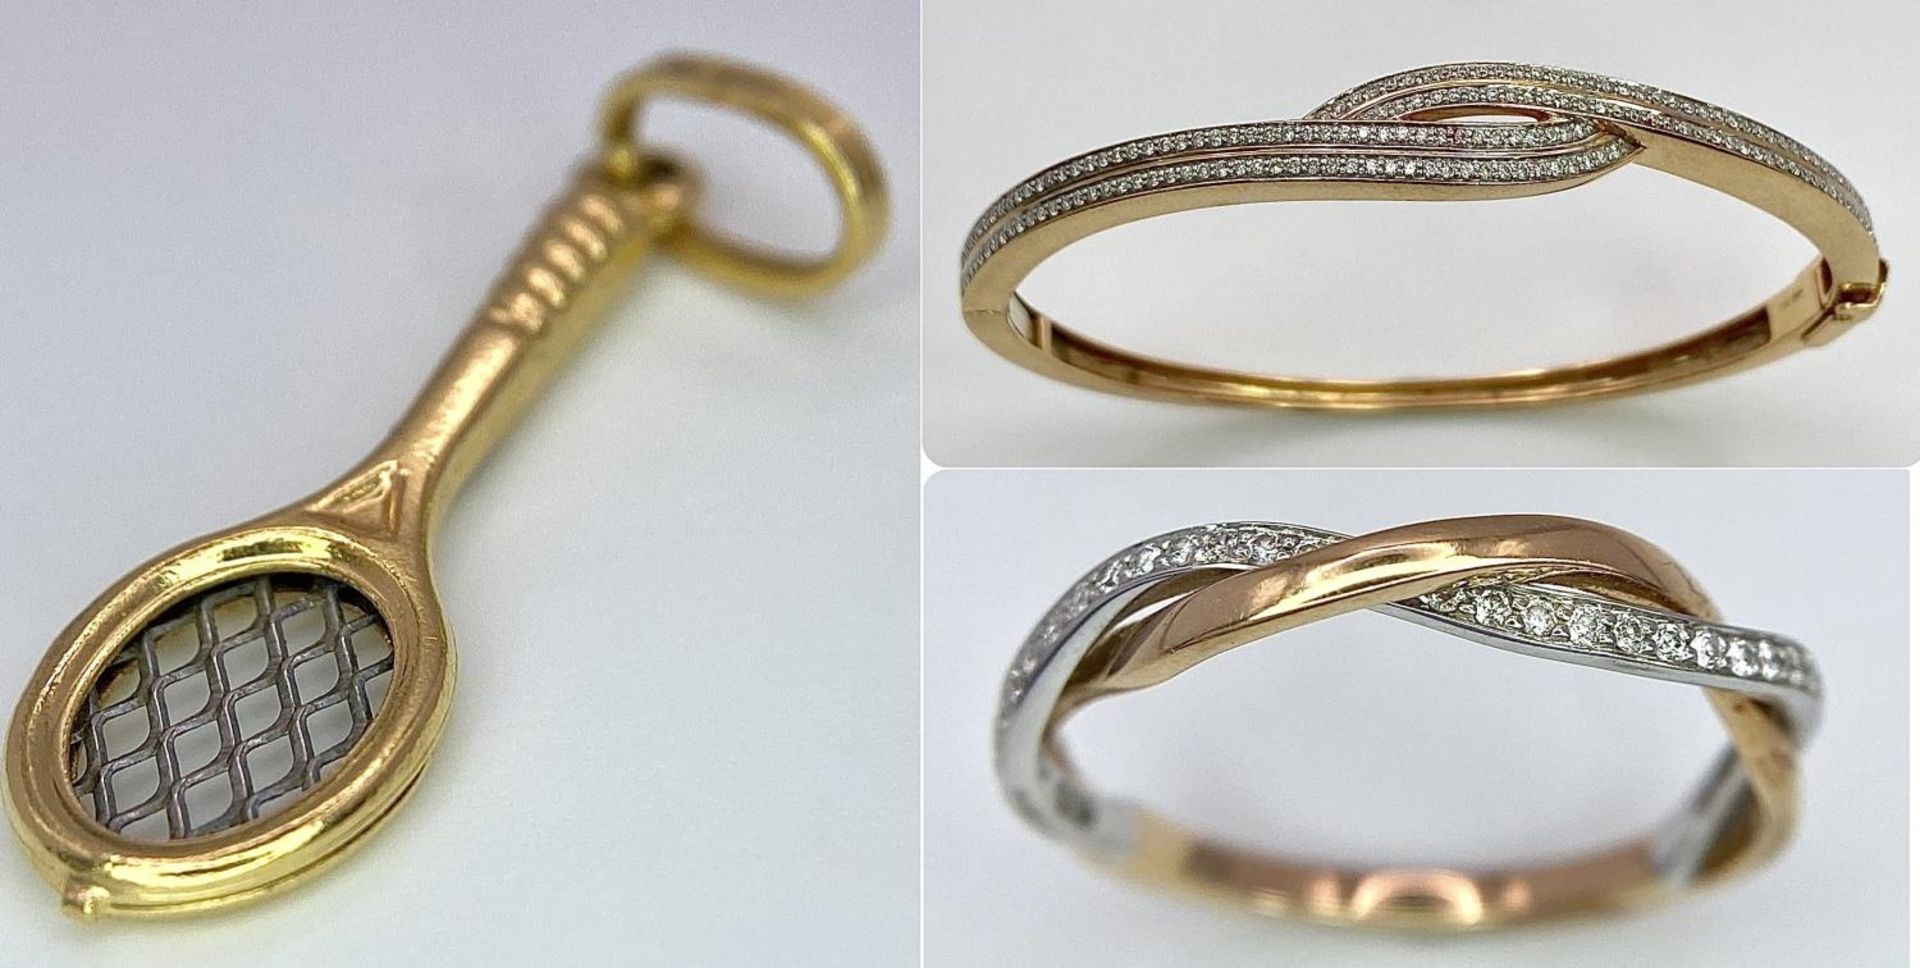 A job lot of three 18 K yellow gold items, consisting of a diamond bangle with an elegant cross over